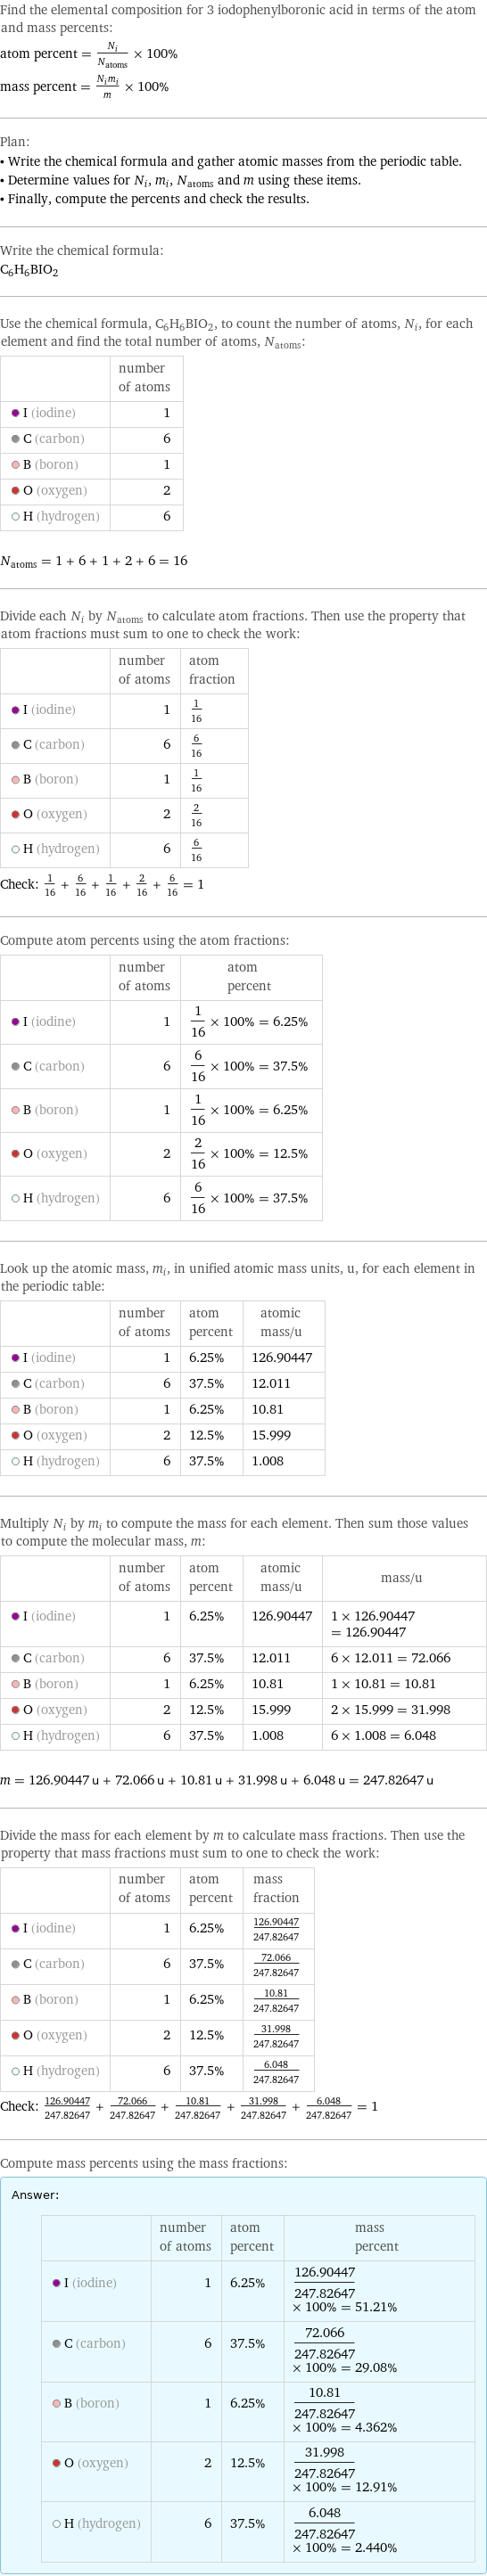 Find the elemental composition for 3 iodophenylboronic acid in terms of the atom and mass percents: atom percent = N_i/N_atoms × 100% mass percent = (N_im_i)/m × 100% Plan: • Write the chemical formula and gather atomic masses from the periodic table. • Determine values for N_i, m_i, N_atoms and m using these items. • Finally, compute the percents and check the results. Write the chemical formula: C_6H_6BIO_2 Use the chemical formula, C_6H_6BIO_2, to count the number of atoms, N_i, for each element and find the total number of atoms, N_atoms:  | number of atoms  I (iodine) | 1  C (carbon) | 6  B (boron) | 1  O (oxygen) | 2  H (hydrogen) | 6  N_atoms = 1 + 6 + 1 + 2 + 6 = 16 Divide each N_i by N_atoms to calculate atom fractions. Then use the property that atom fractions must sum to one to check the work:  | number of atoms | atom fraction  I (iodine) | 1 | 1/16  C (carbon) | 6 | 6/16  B (boron) | 1 | 1/16  O (oxygen) | 2 | 2/16  H (hydrogen) | 6 | 6/16 Check: 1/16 + 6/16 + 1/16 + 2/16 + 6/16 = 1 Compute atom percents using the atom fractions:  | number of atoms | atom percent  I (iodine) | 1 | 1/16 × 100% = 6.25%  C (carbon) | 6 | 6/16 × 100% = 37.5%  B (boron) | 1 | 1/16 × 100% = 6.25%  O (oxygen) | 2 | 2/16 × 100% = 12.5%  H (hydrogen) | 6 | 6/16 × 100% = 37.5% Look up the atomic mass, m_i, in unified atomic mass units, u, for each element in the periodic table:  | number of atoms | atom percent | atomic mass/u  I (iodine) | 1 | 6.25% | 126.90447  C (carbon) | 6 | 37.5% | 12.011  B (boron) | 1 | 6.25% | 10.81  O (oxygen) | 2 | 12.5% | 15.999  H (hydrogen) | 6 | 37.5% | 1.008 Multiply N_i by m_i to compute the mass for each element. Then sum those values to compute the molecular mass, m:  | number of atoms | atom percent | atomic mass/u | mass/u  I (iodine) | 1 | 6.25% | 126.90447 | 1 × 126.90447 = 126.90447  C (carbon) | 6 | 37.5% | 12.011 | 6 × 12.011 = 72.066  B (boron) | 1 | 6.25% | 10.81 | 1 × 10.81 = 10.81  O (oxygen) | 2 | 12.5% | 15.999 | 2 × 15.999 = 31.998  H (hydrogen) | 6 | 37.5% | 1.008 | 6 × 1.008 = 6.048  m = 126.90447 u + 72.066 u + 10.81 u + 31.998 u + 6.048 u = 247.82647 u Divide the mass for each element by m to calculate mass fractions. Then use the property that mass fractions must sum to one to check the work:  | number of atoms | atom percent | mass fraction  I (iodine) | 1 | 6.25% | 126.90447/247.82647  C (carbon) | 6 | 37.5% | 72.066/247.82647  B (boron) | 1 | 6.25% | 10.81/247.82647  O (oxygen) | 2 | 12.5% | 31.998/247.82647  H (hydrogen) | 6 | 37.5% | 6.048/247.82647 Check: 126.90447/247.82647 + 72.066/247.82647 + 10.81/247.82647 + 31.998/247.82647 + 6.048/247.82647 = 1 Compute mass percents using the mass fractions: Answer: |   | | number of atoms | atom percent | mass percent  I (iodine) | 1 | 6.25% | 126.90447/247.82647 × 100% = 51.21%  C (carbon) | 6 | 37.5% | 72.066/247.82647 × 100% = 29.08%  B (boron) | 1 | 6.25% | 10.81/247.82647 × 100% = 4.362%  O (oxygen) | 2 | 12.5% | 31.998/247.82647 × 100% = 12.91%  H (hydrogen) | 6 | 37.5% | 6.048/247.82647 × 100% = 2.440%